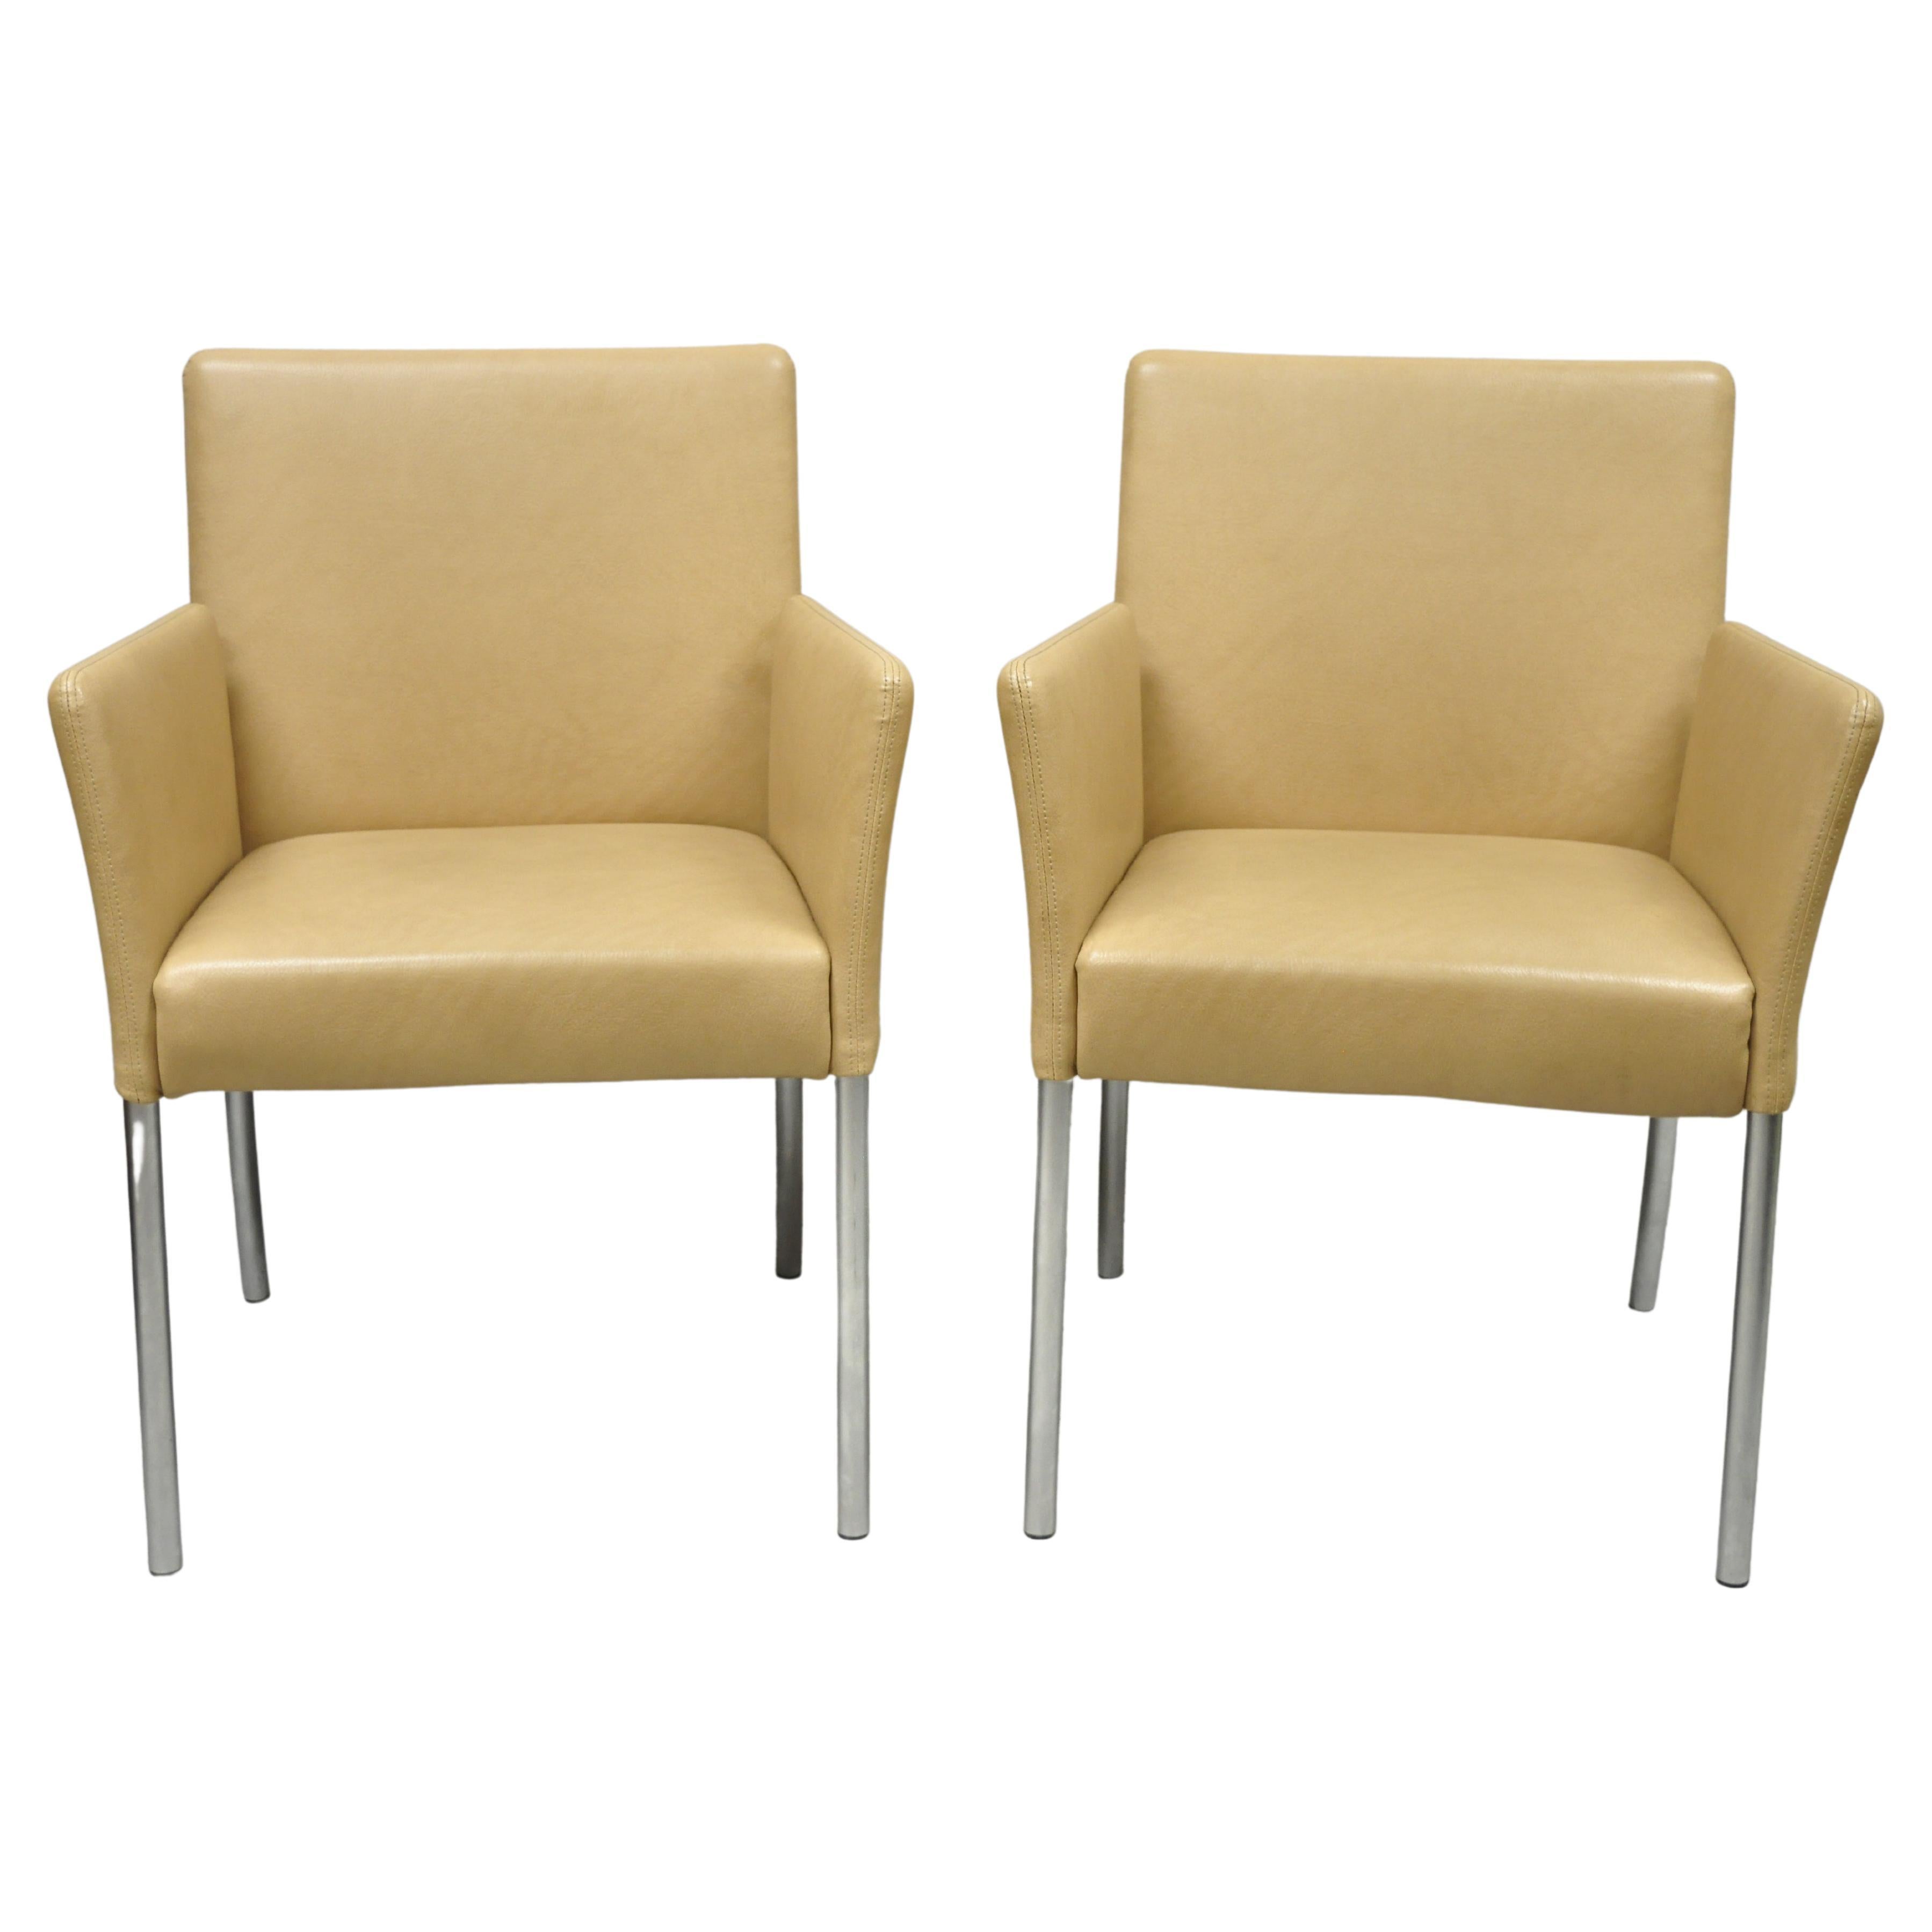 Coalesce Steelcase Beige Leather Model 1510 Switch Guest Arm Chair 'A', a Pair For Sale